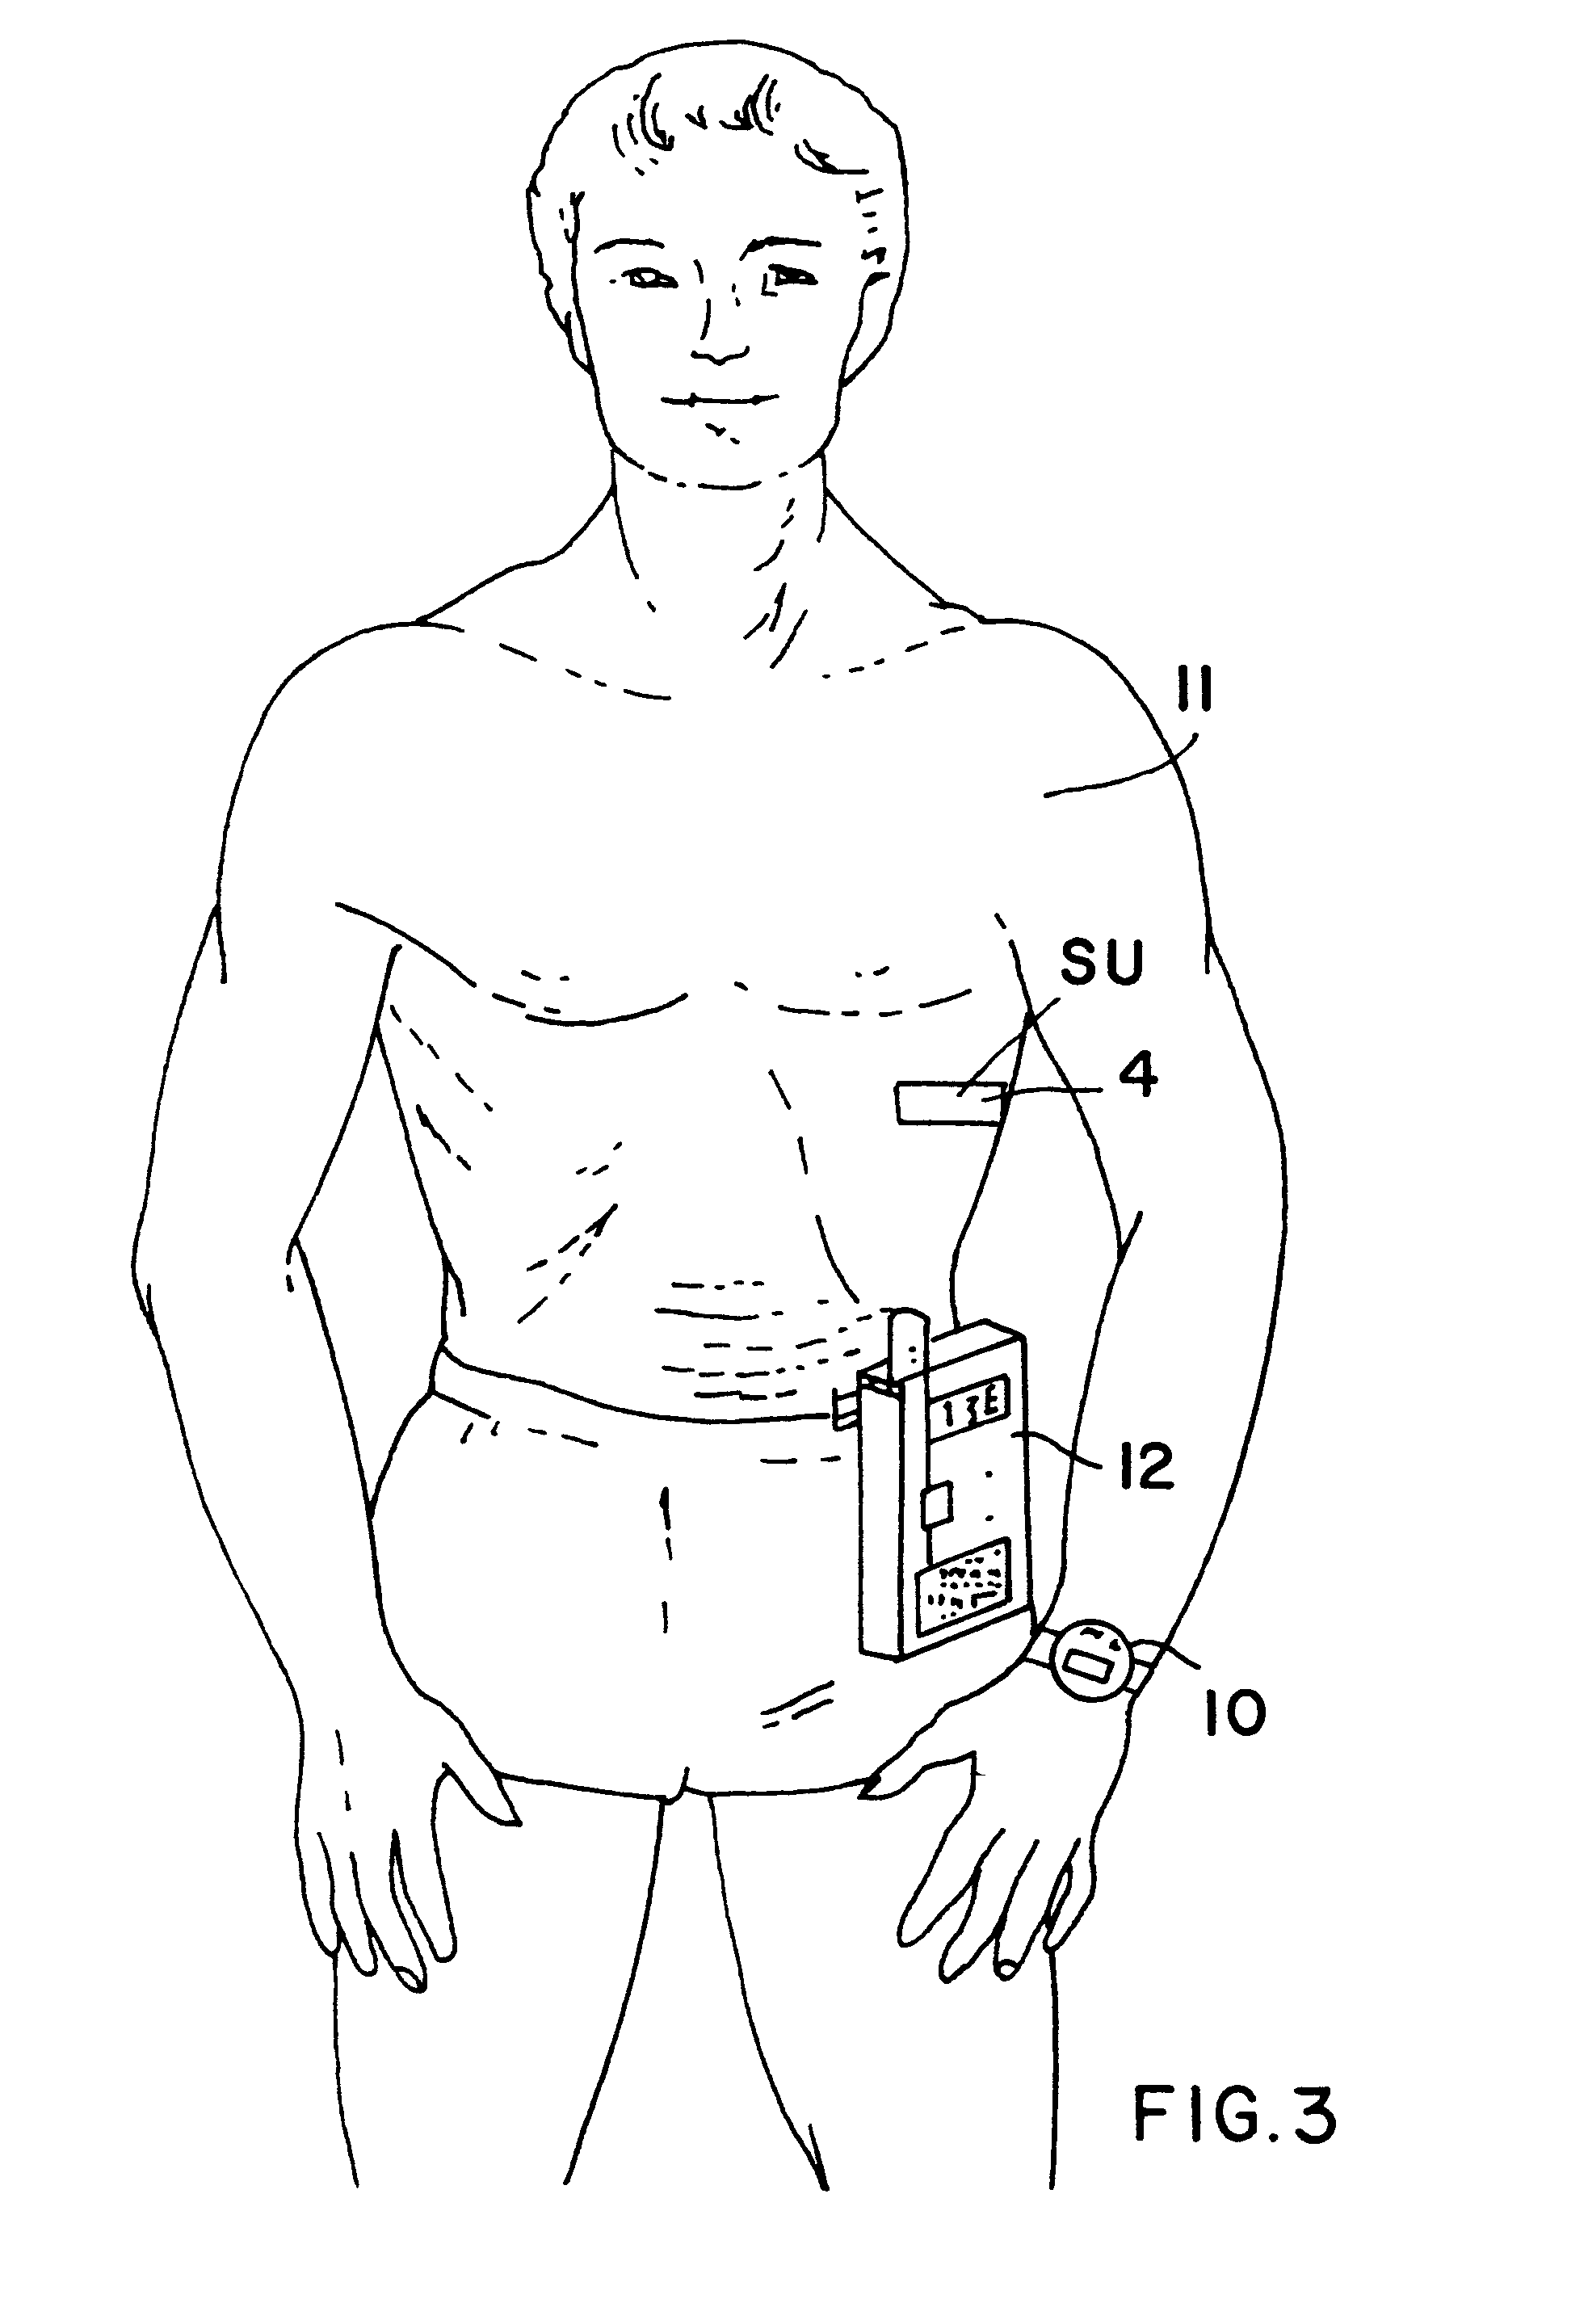 System for long-term remote medical monitoring